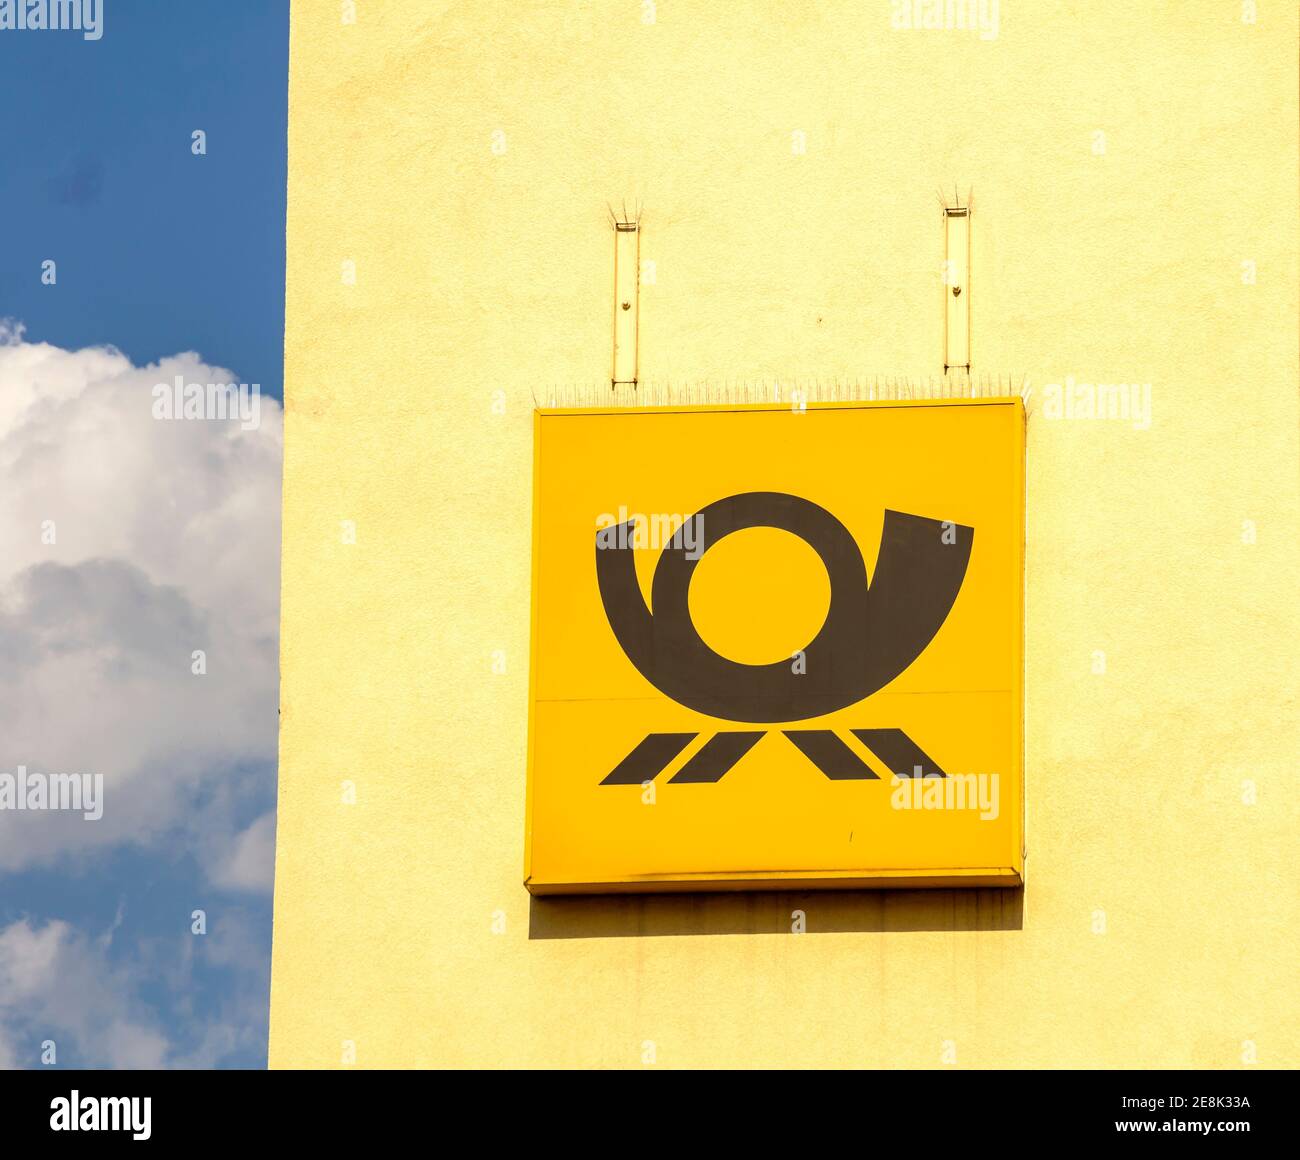 Nurnberg, Germany : DEUTSCHE POST cargo terminal and logo on the building .Deutsche Post AG is a German courier company and the world's largest. Stock Photo